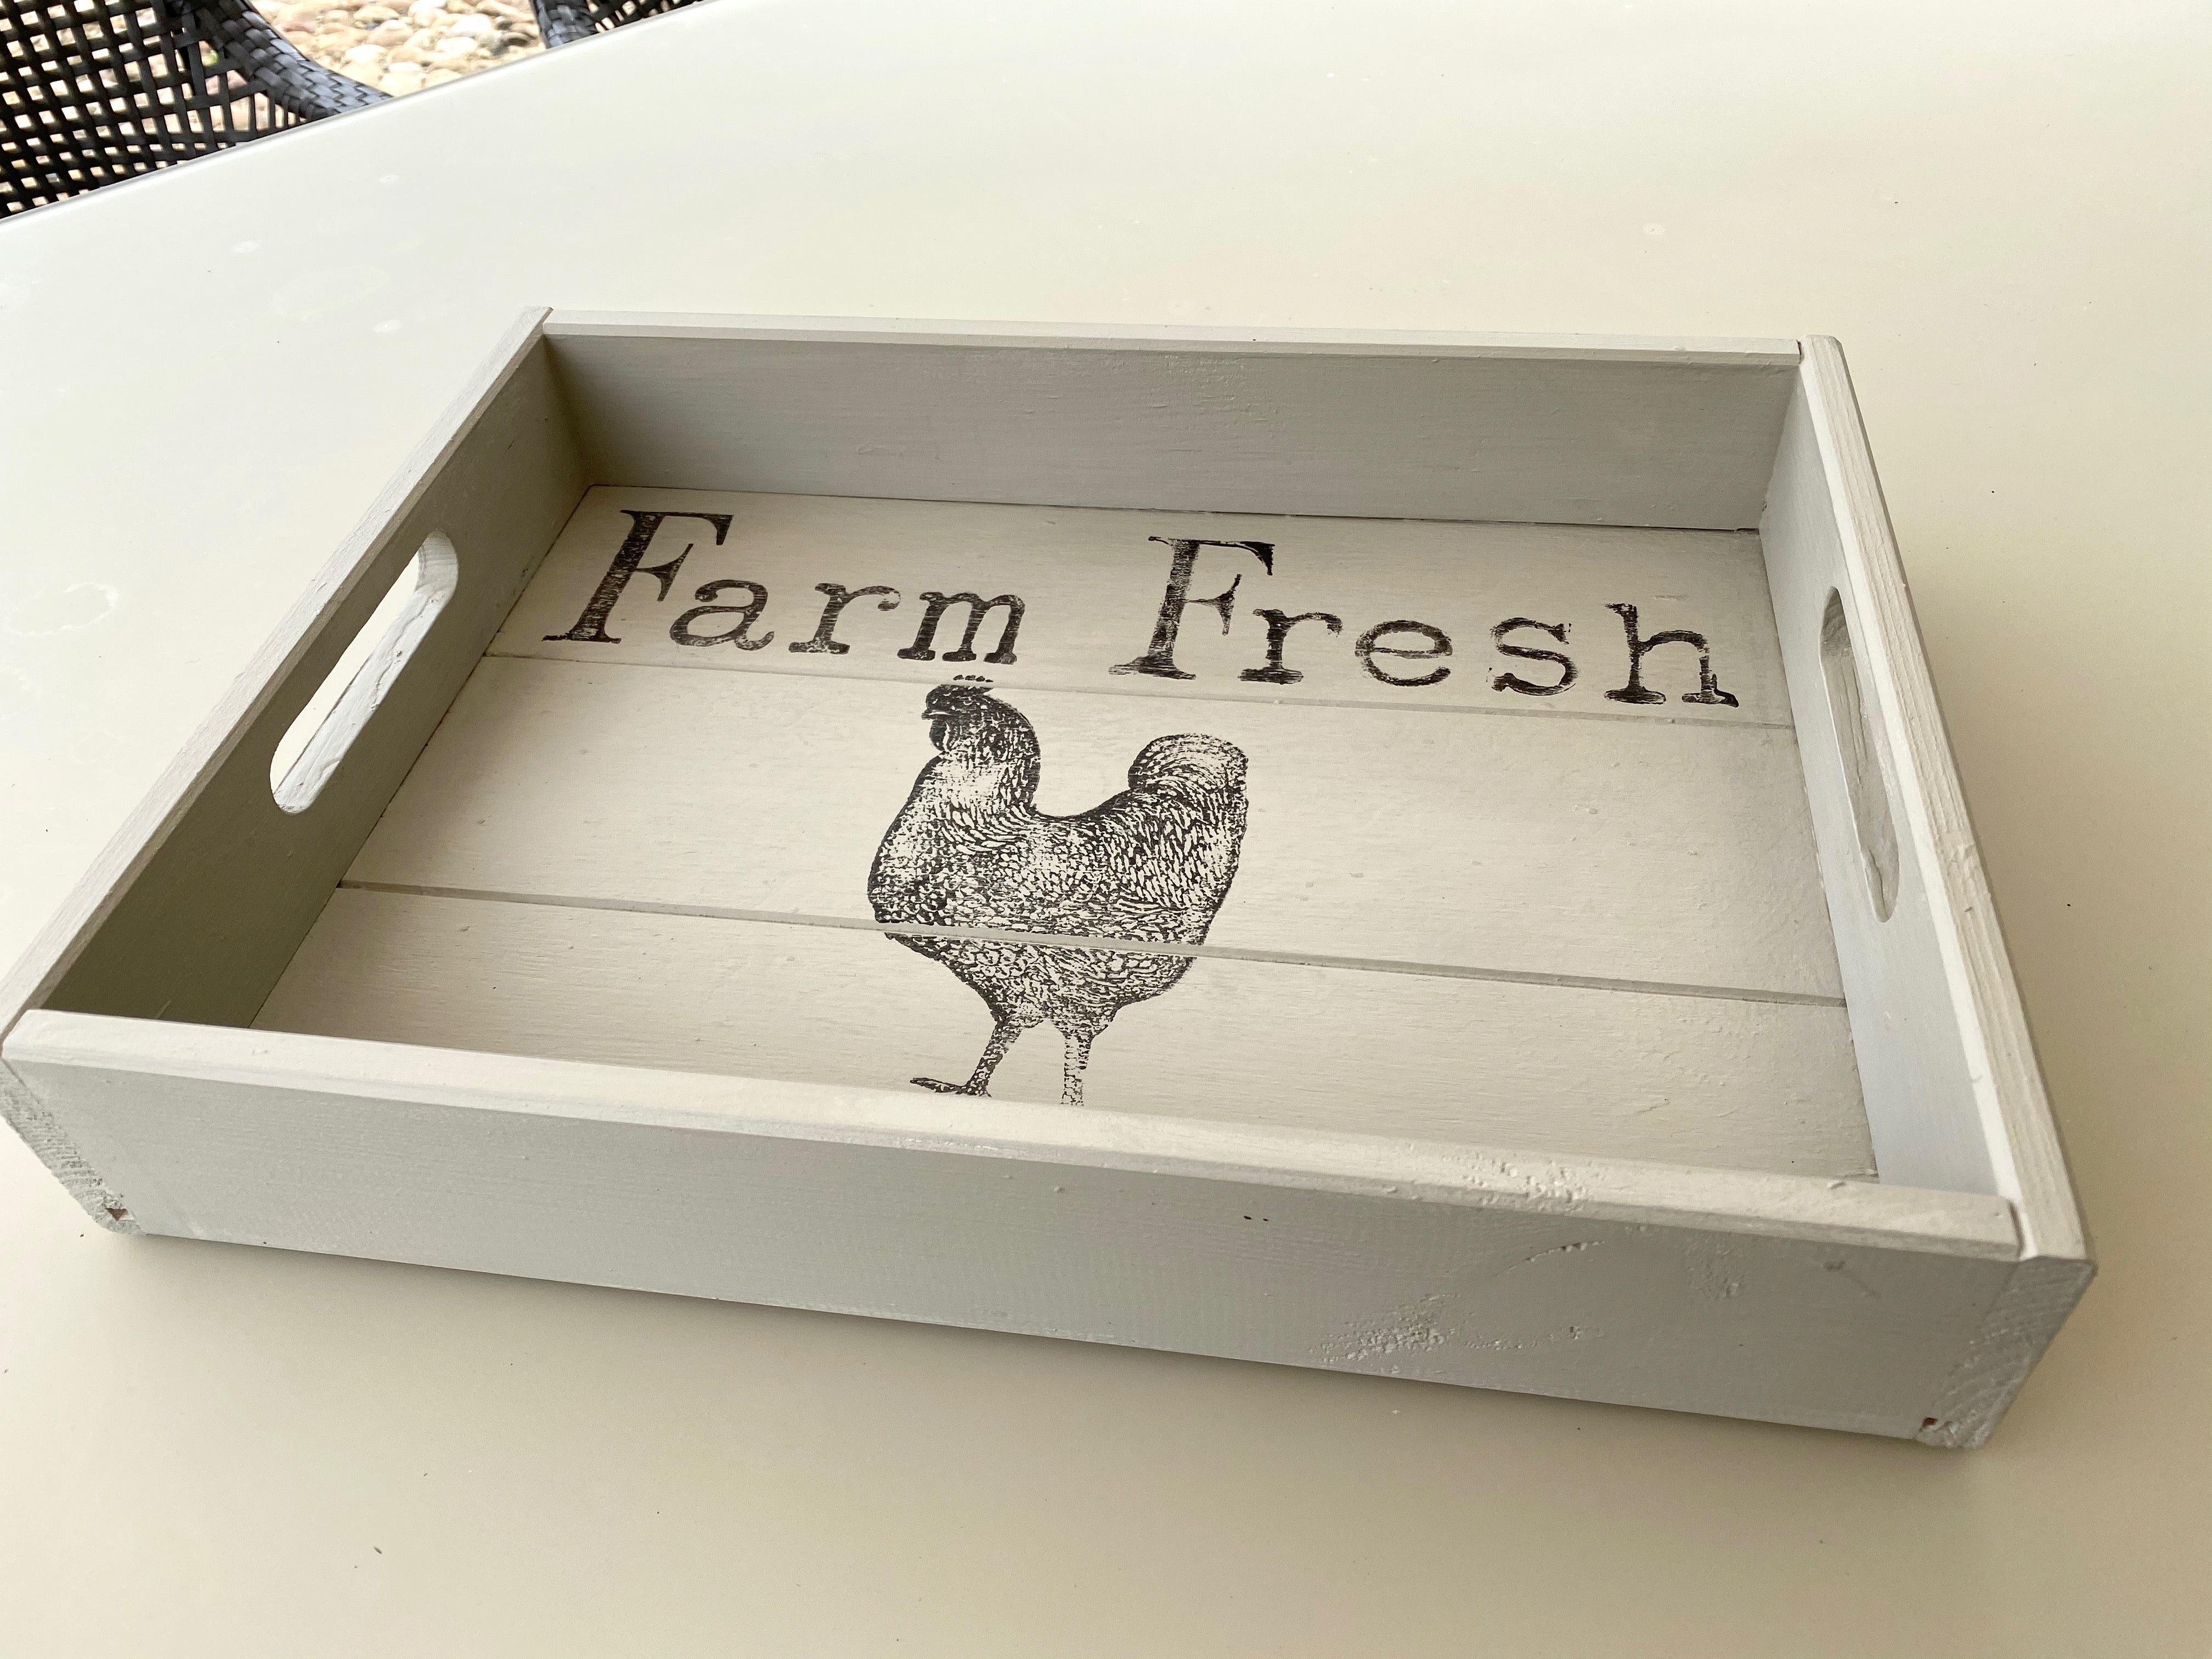 Farm Animal Stamp by Iron Orchid Designs